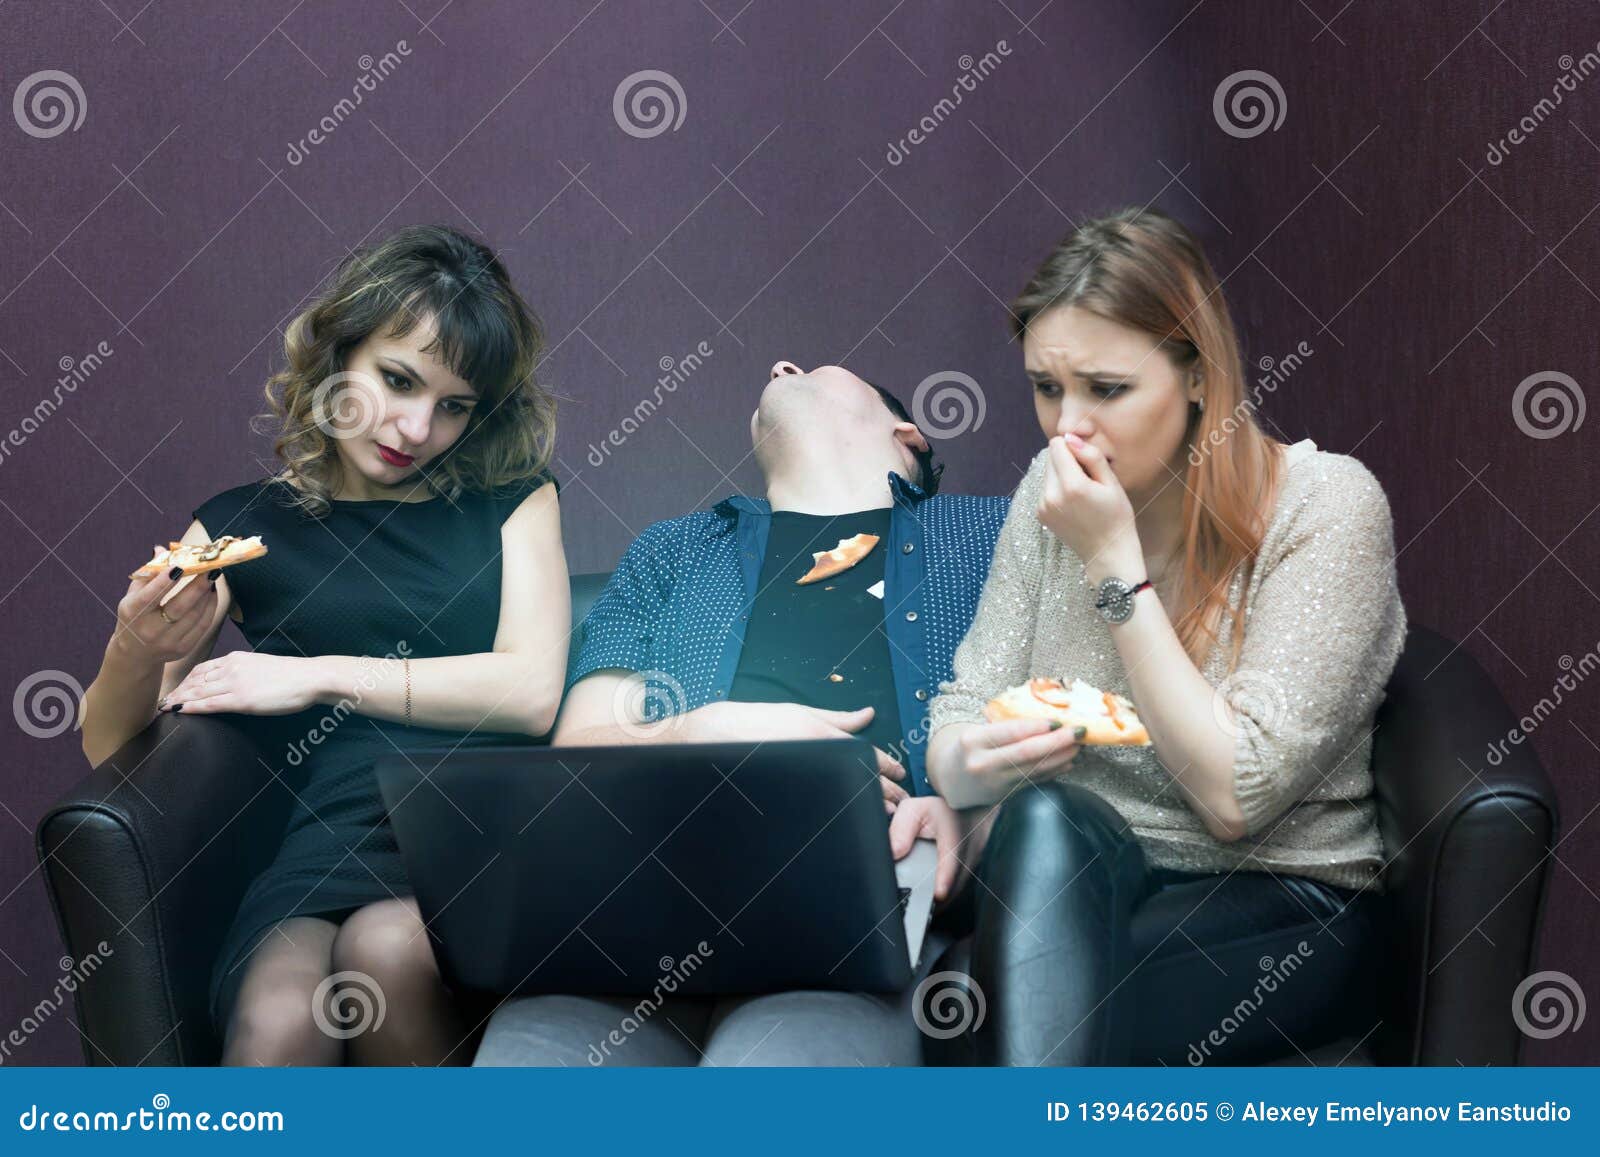 Two Girls Fell Asleep On Sofa While Watching Tv Royalty Free Stock Image